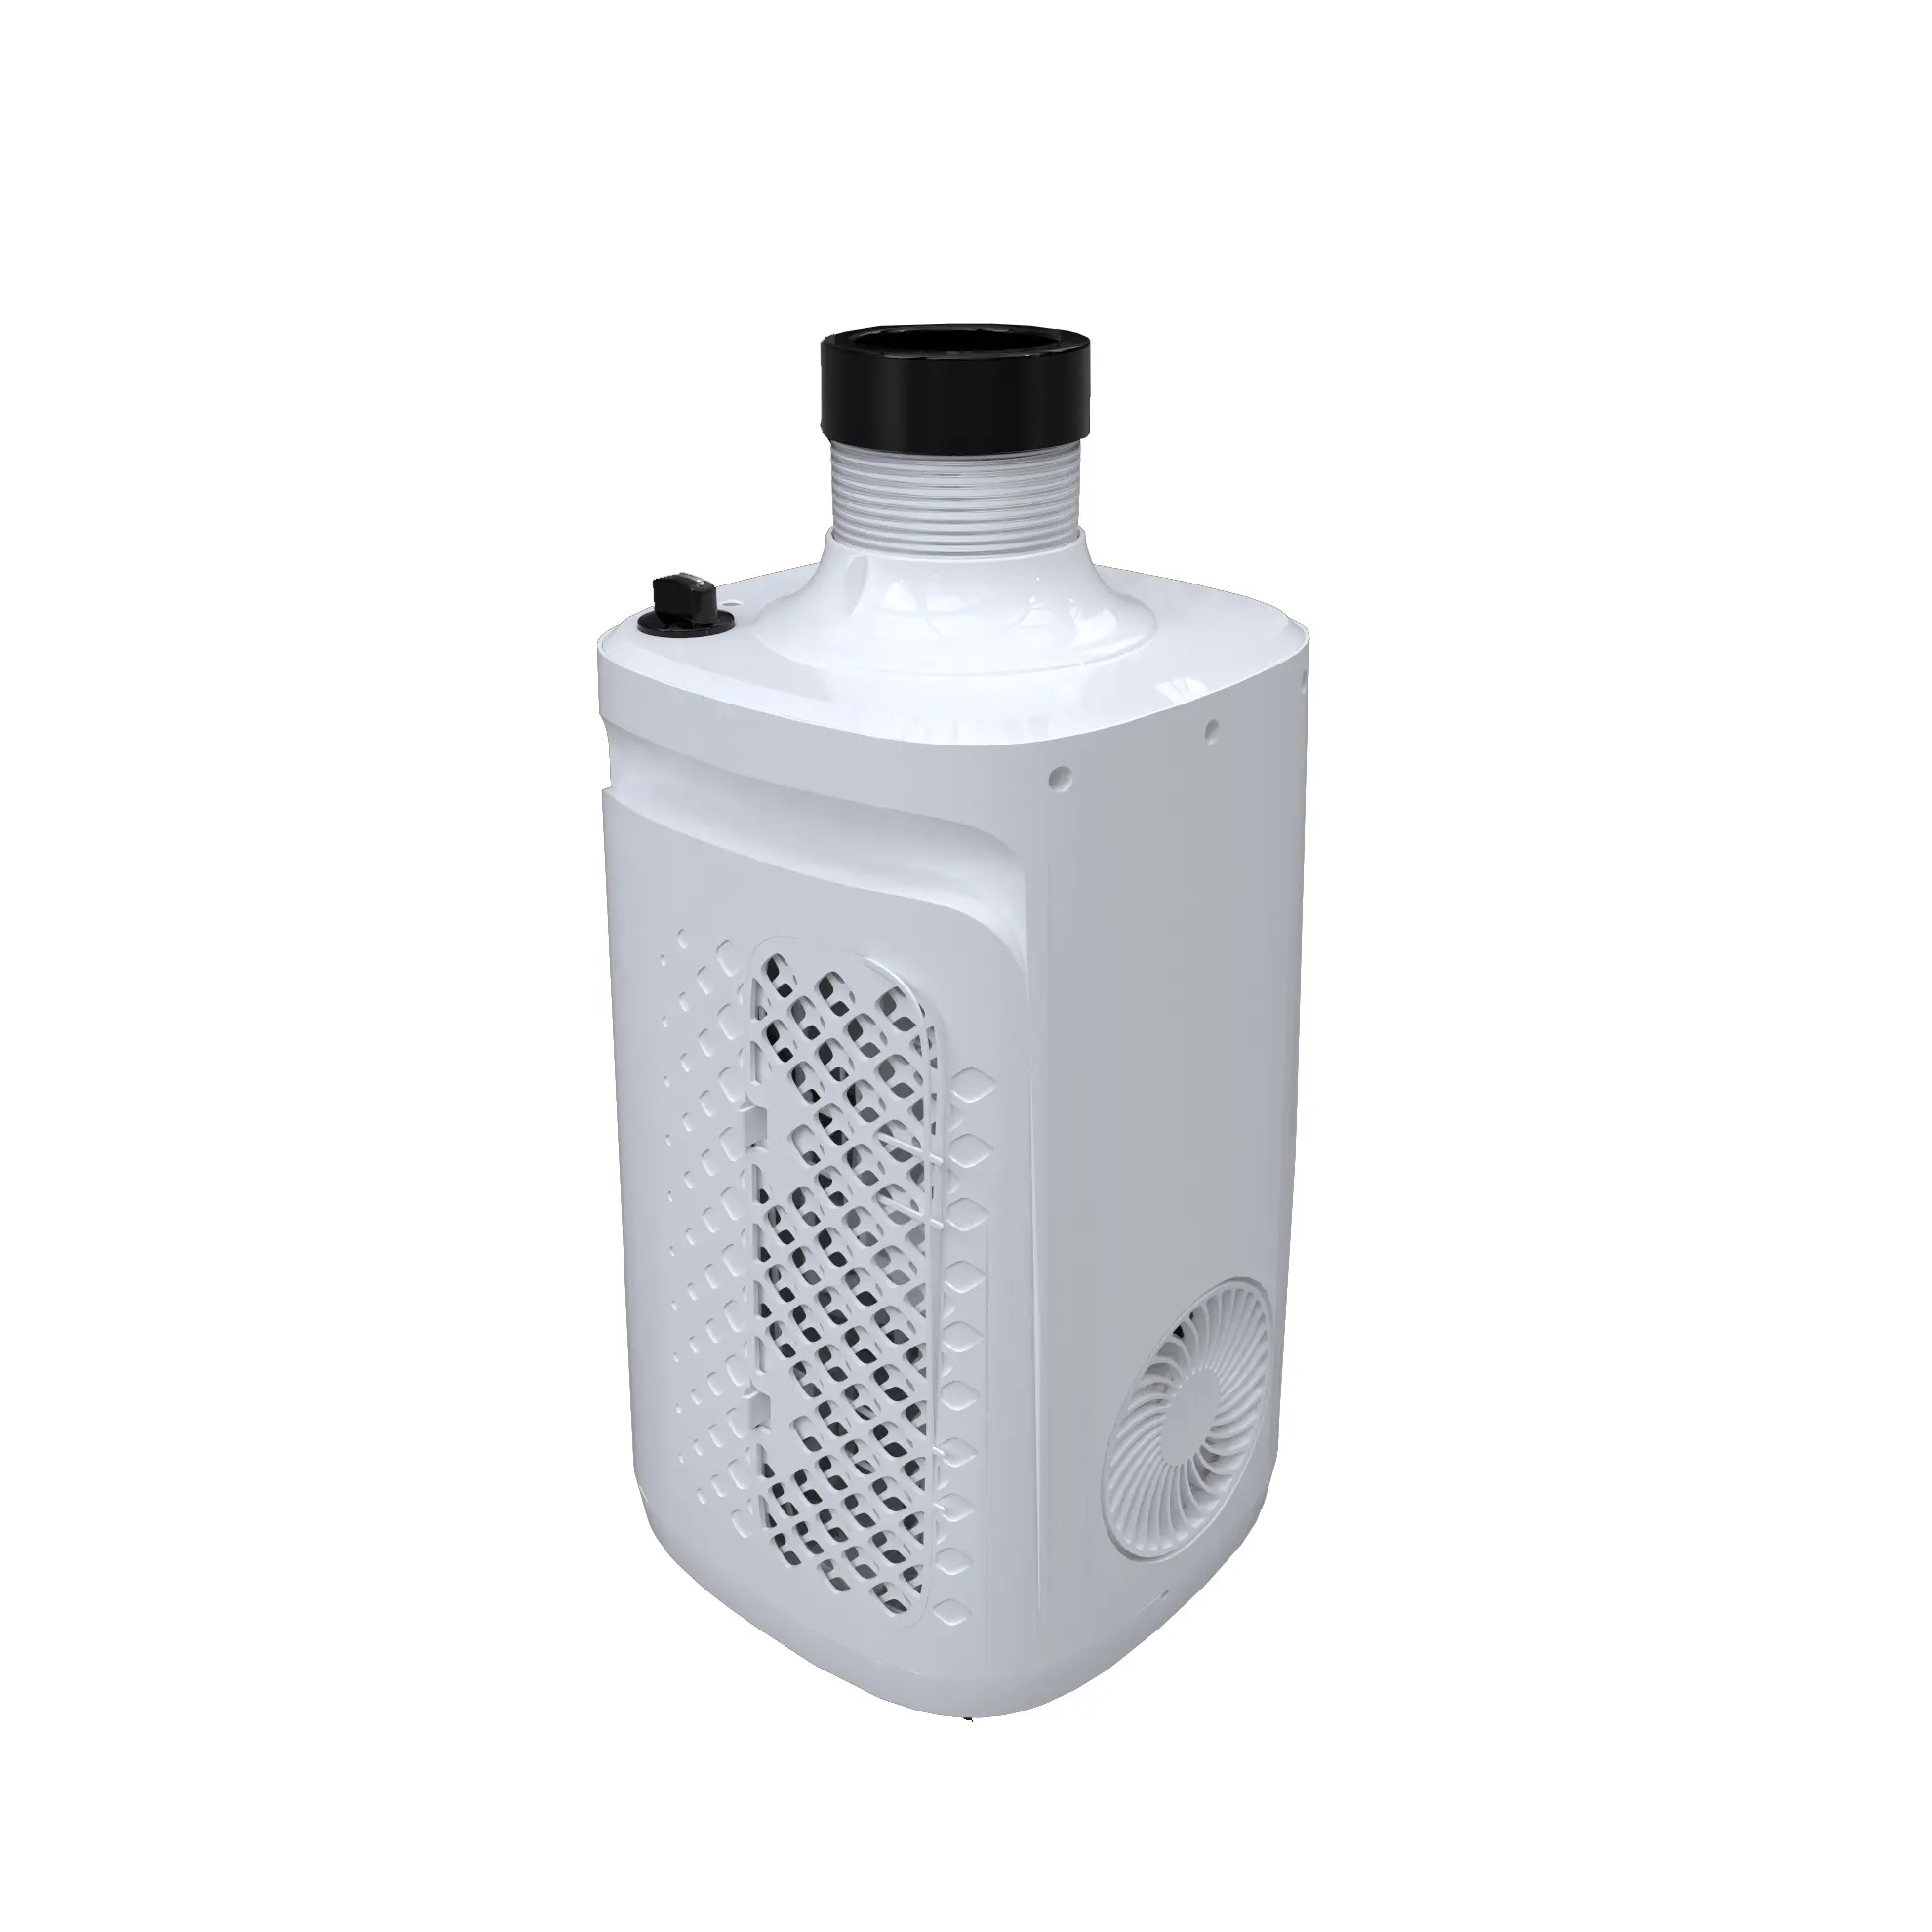 Portable Mini air spot cooler air conditioner 600W 0.6W 2050Btus for home or personal usage